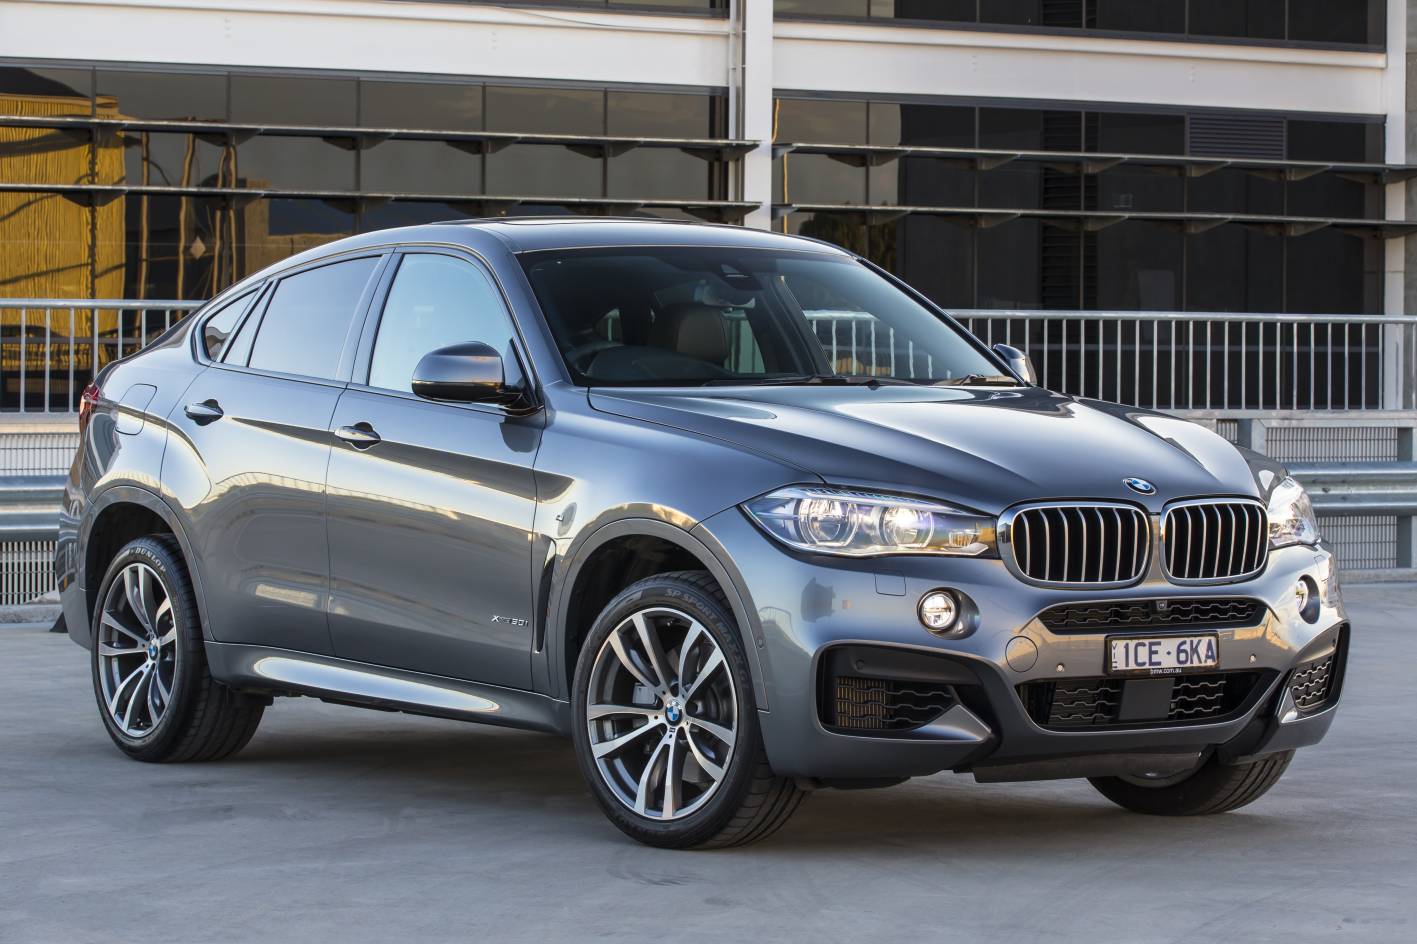 BMW Cars - News: 2015 X6 arrives in Australia from $115,4001417 x 944